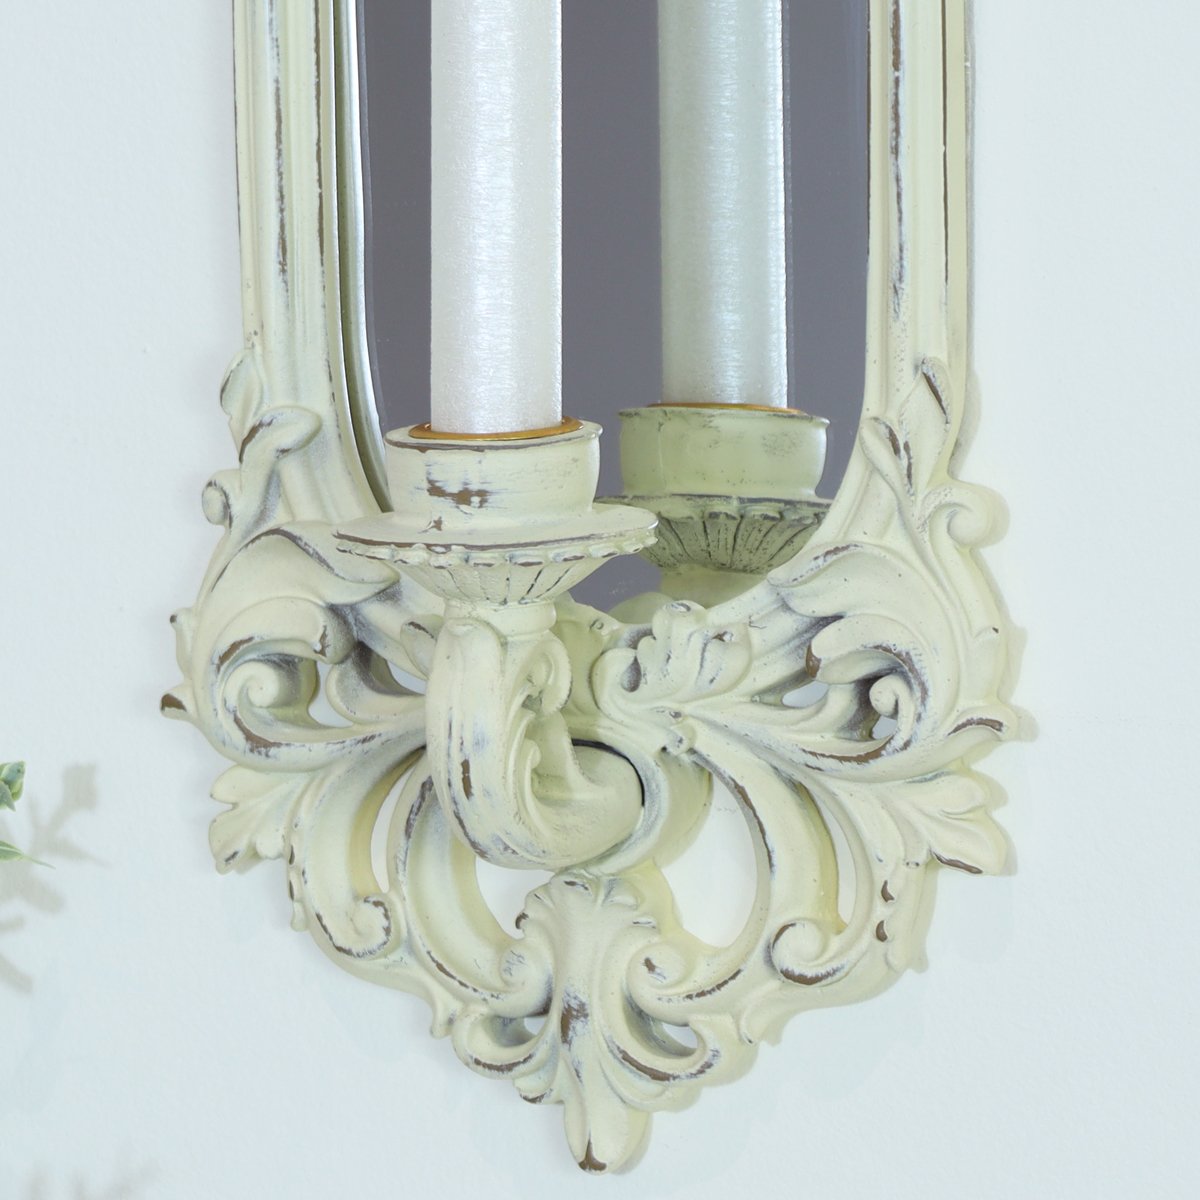 Midnight Elegance Candle Wall Sconces 15 Tall